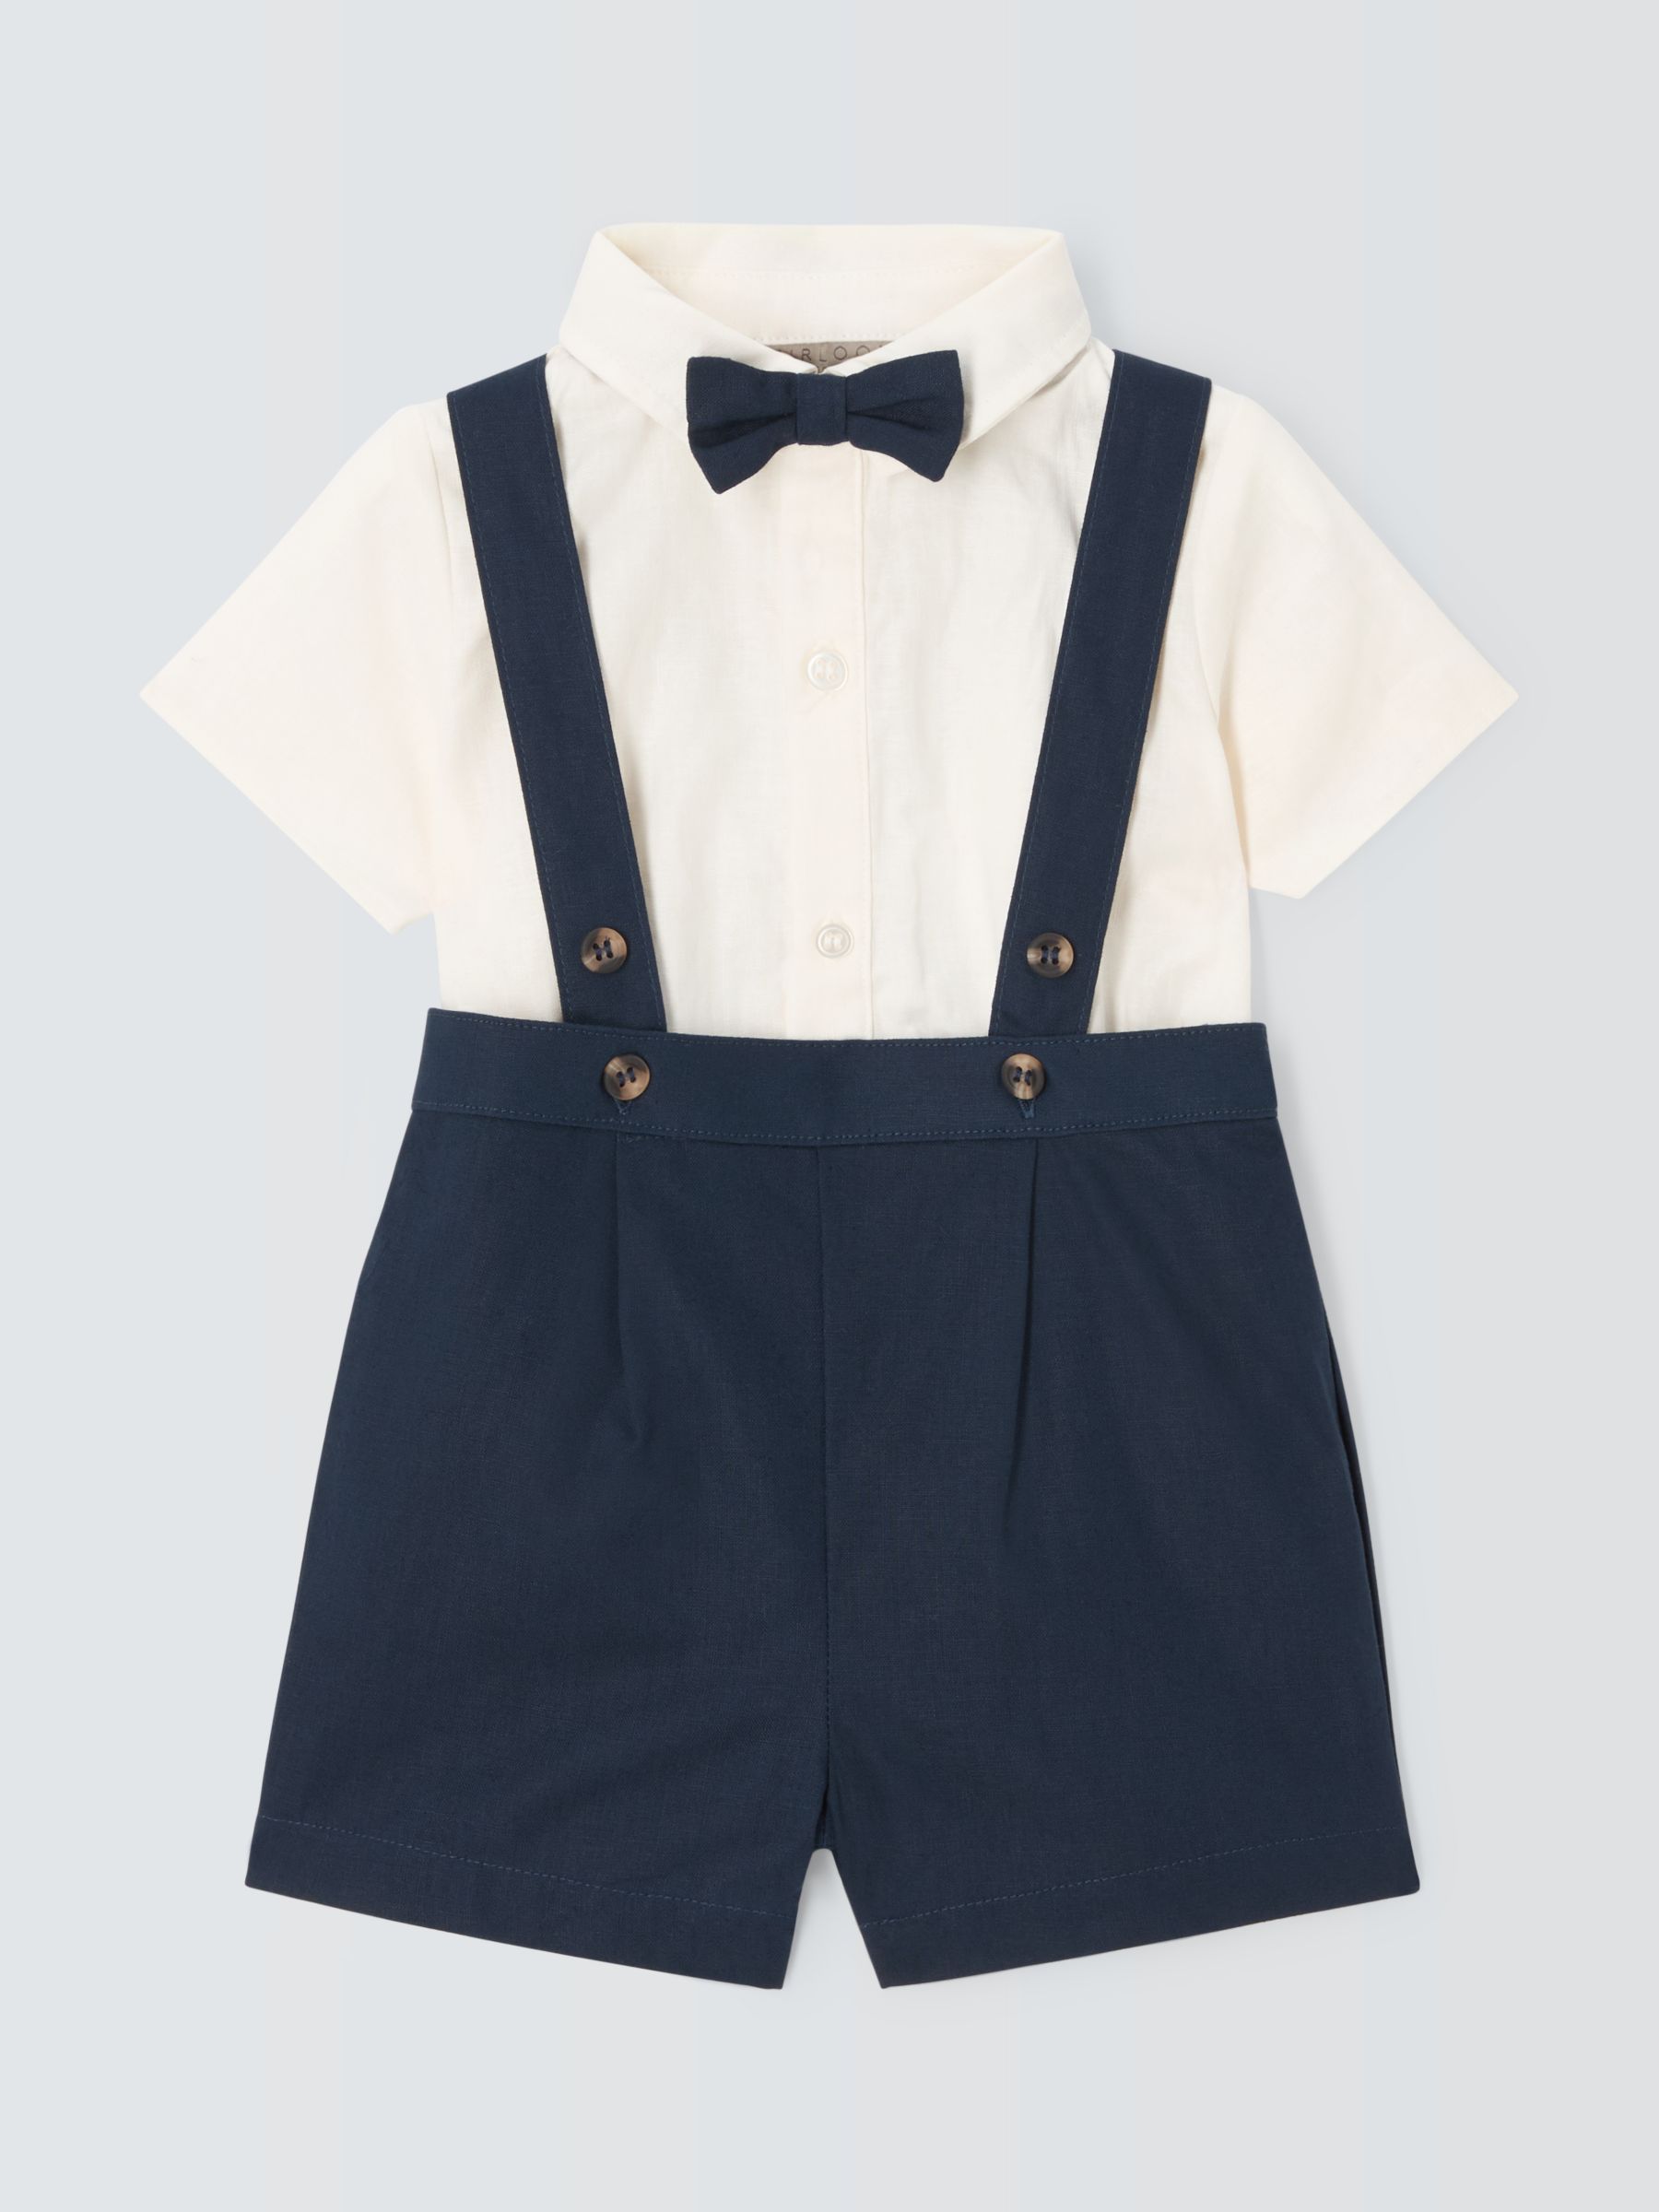 John Lewis Heirloom Collection Baby Bodysuit, Shorts & Bow Tie, Set of 3, Navy, 9-12 months